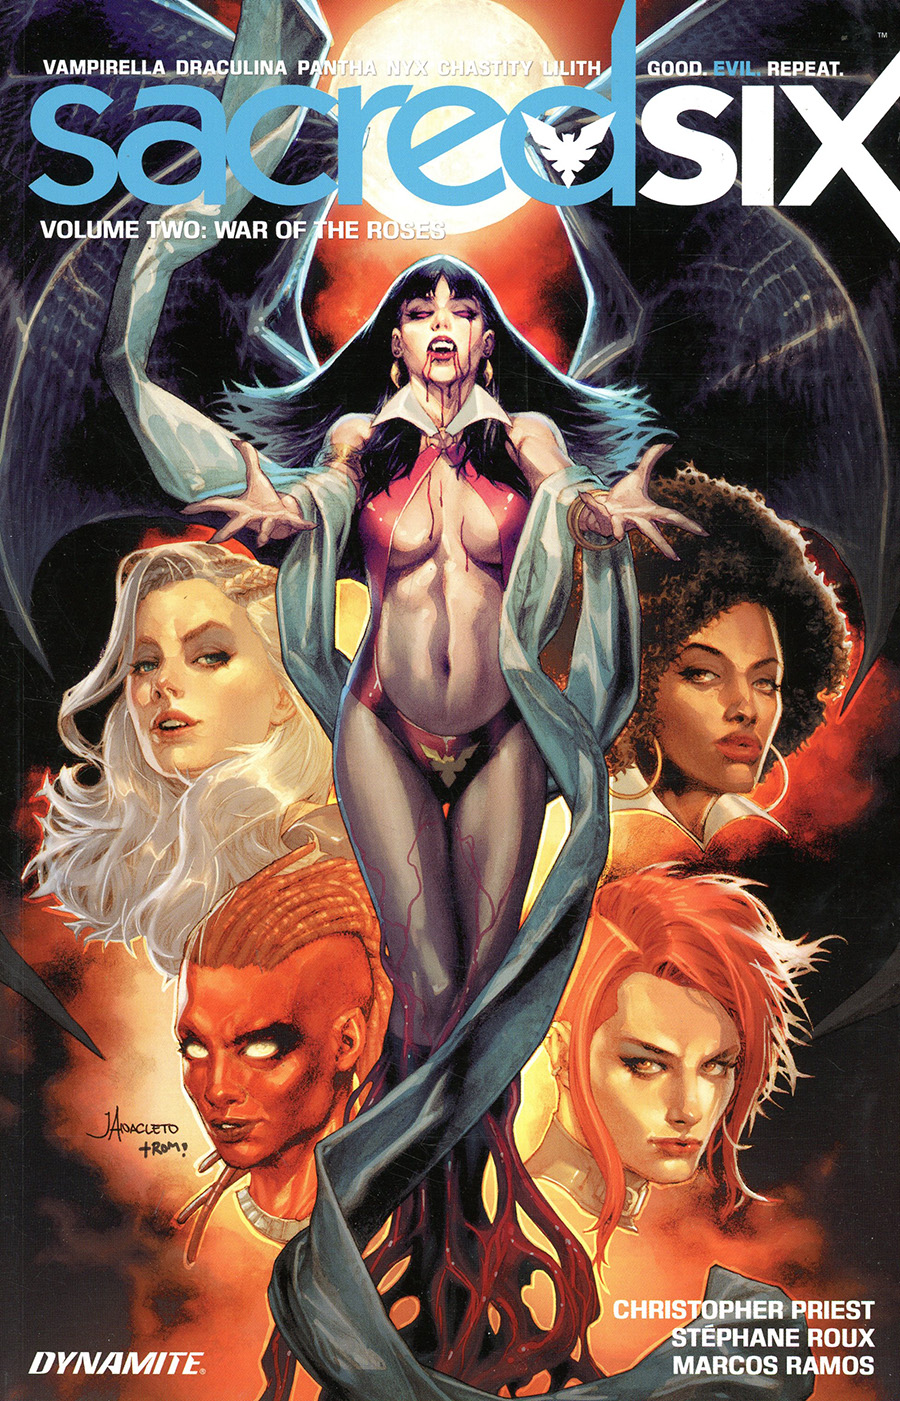 Sacred Six Vol 2 War Of The Roses TP